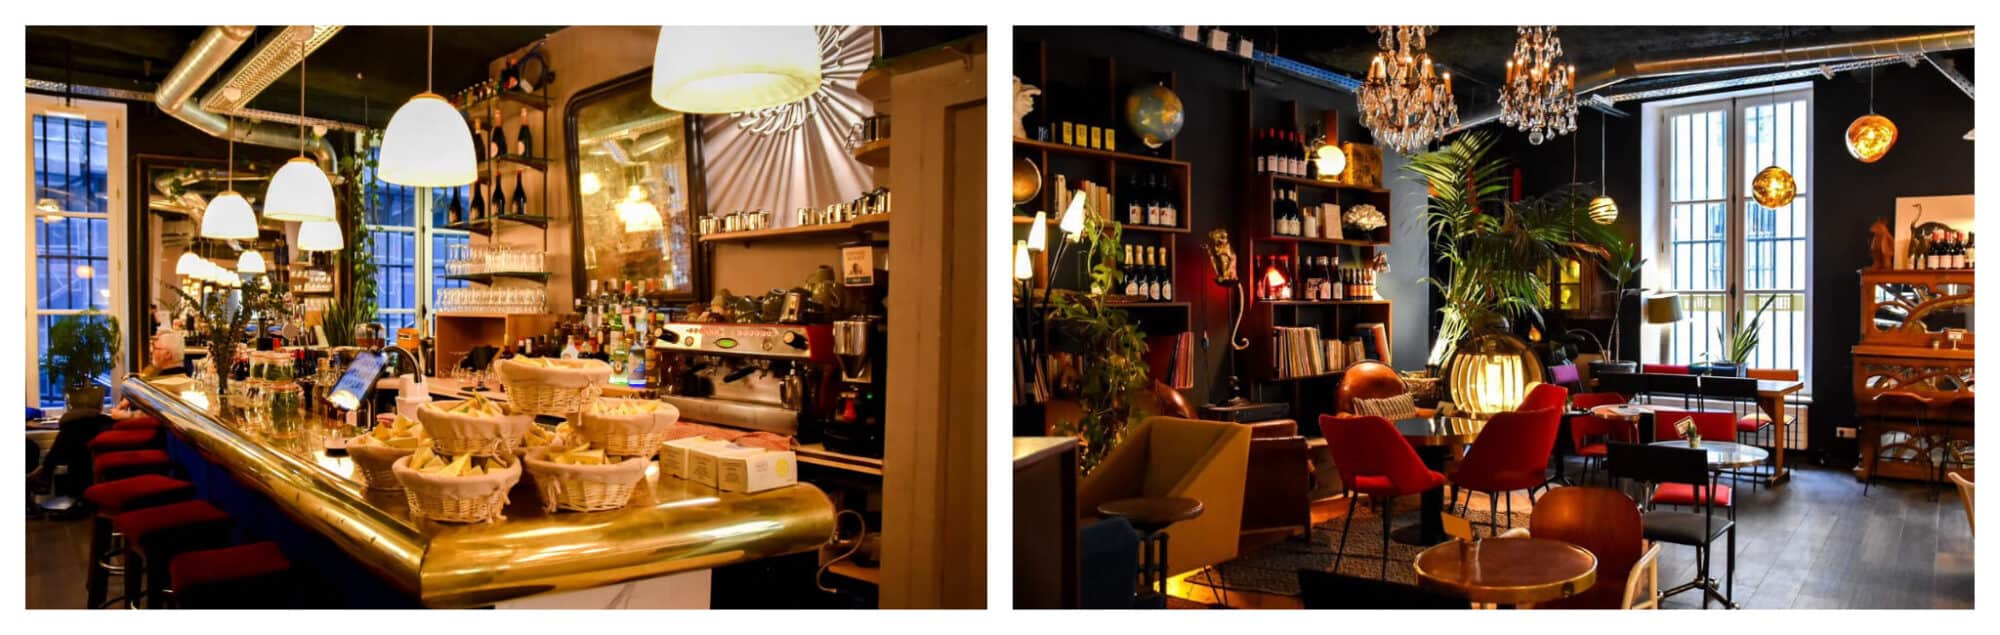 Left: The bar area with of Café Griffon which is adorned with warm lighting, several baskets and red velvet stools under the bar area. Right: The cozy lounge area inside Café Griffon with red chairs, golden ceiling lights, and a few green plants.